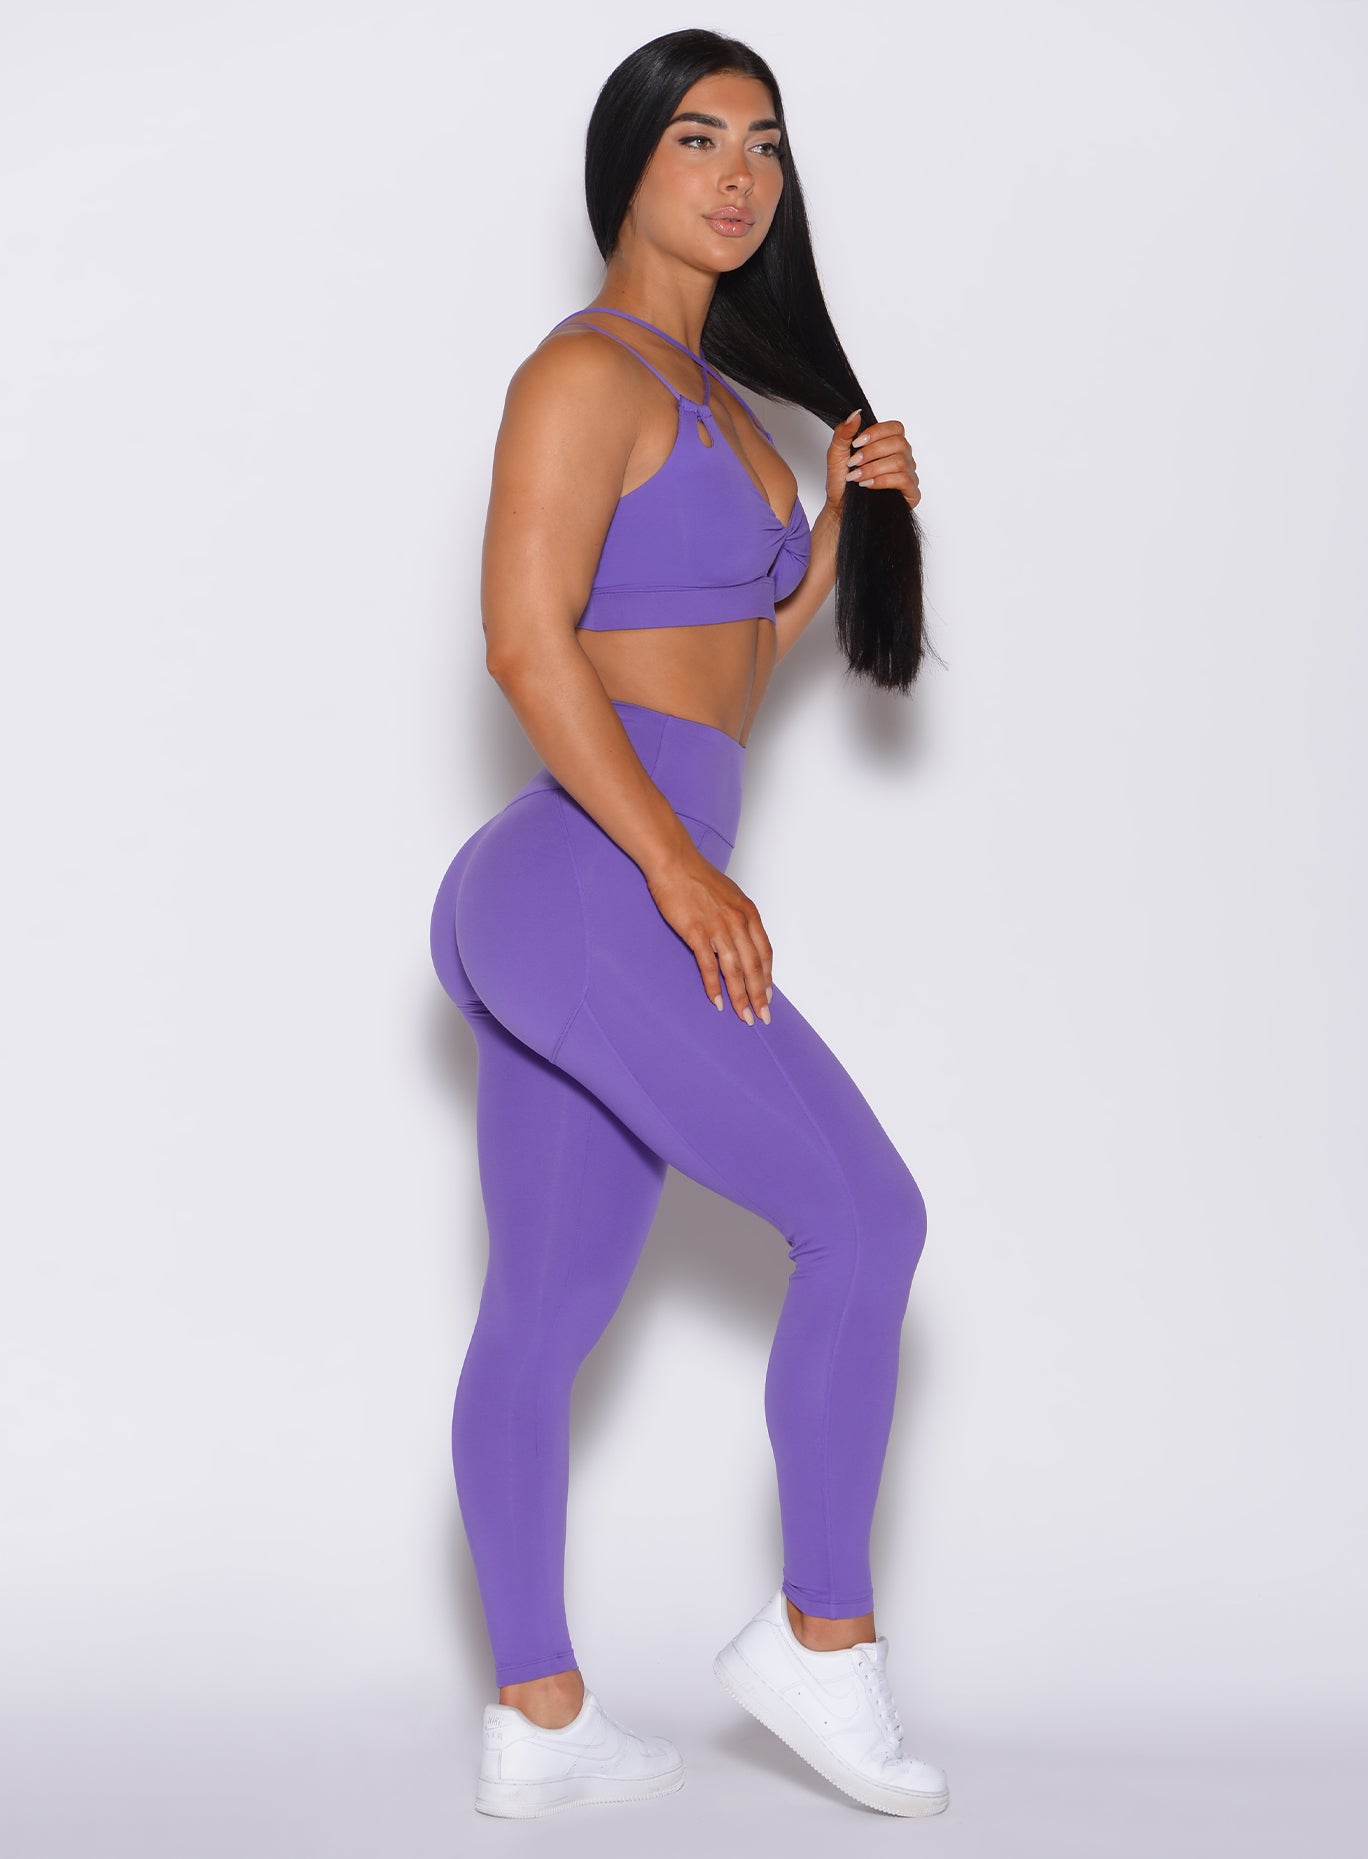 right side profile view of a model facing forward wearing our shape leggings in royal purple color along with the matching bra